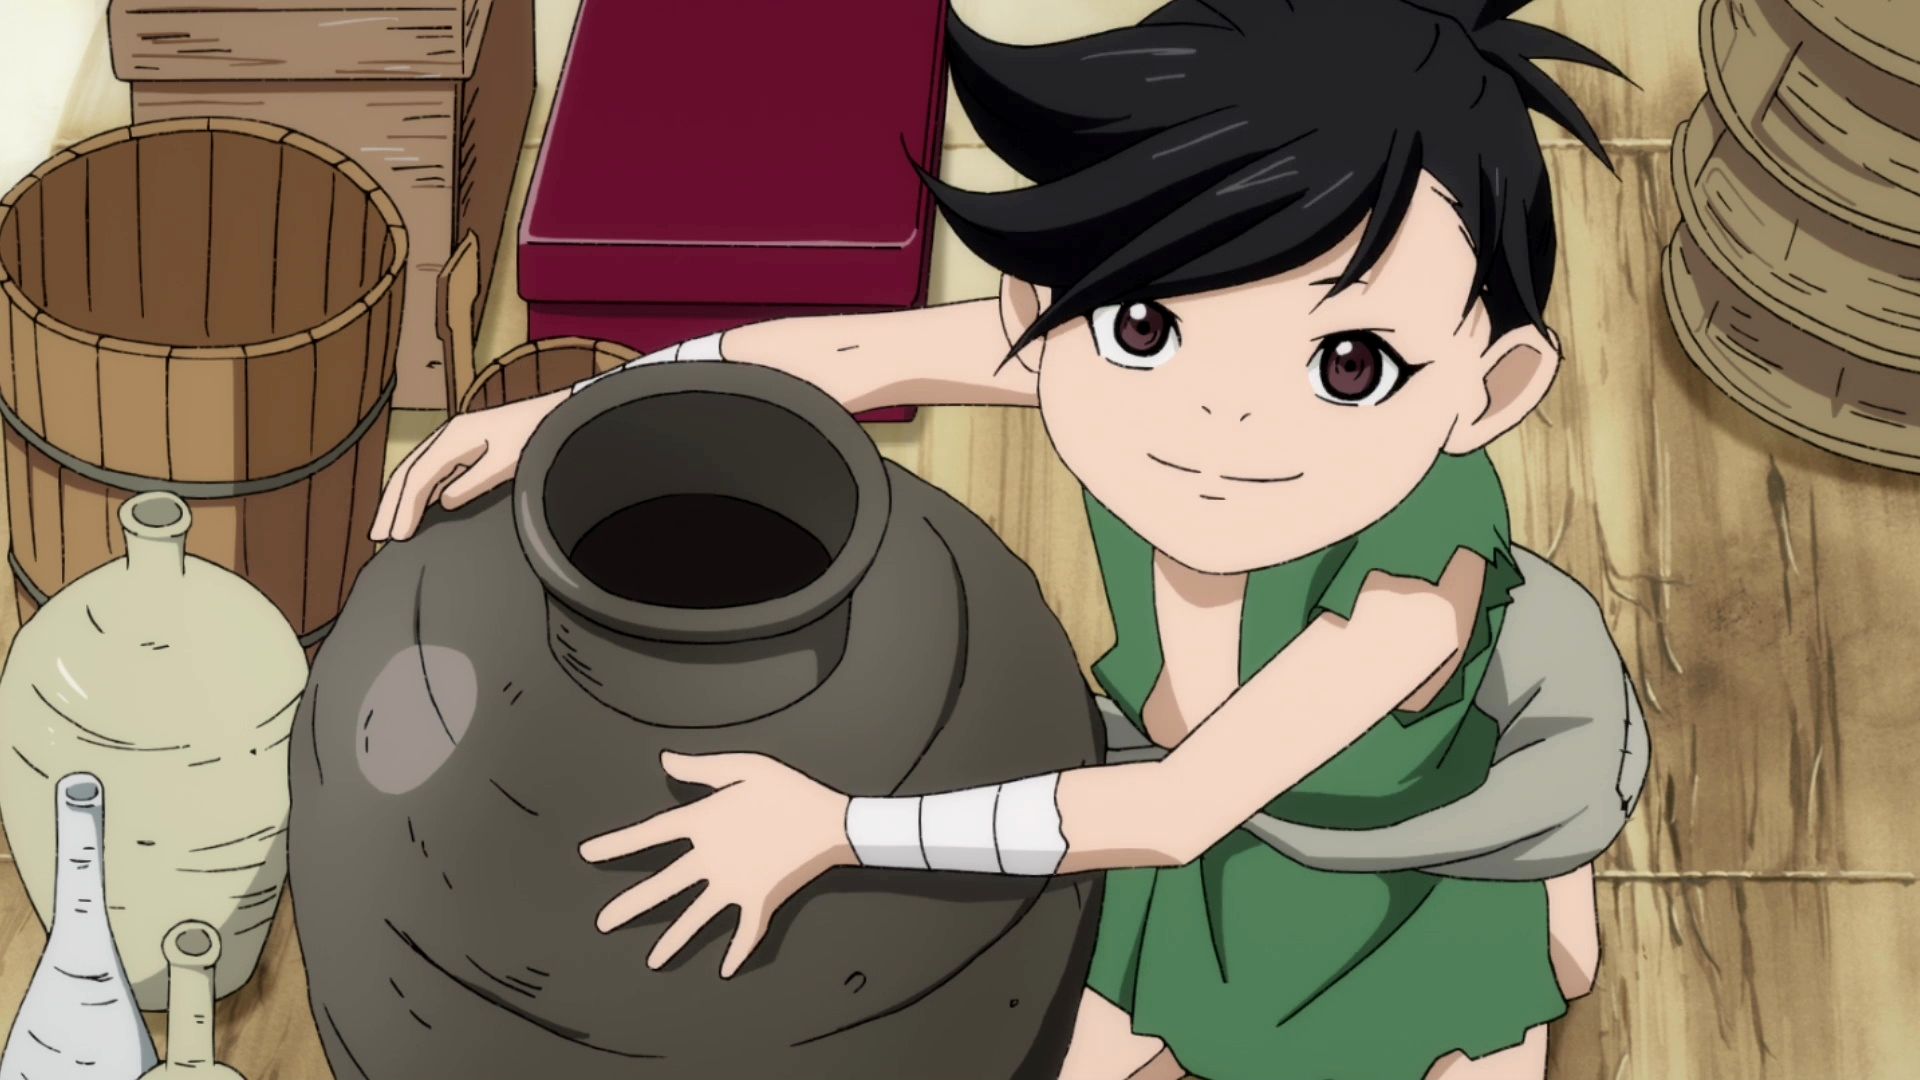 Dororo is a touching tale about a young thief and 'his' enigmatic companion  | SYFY WIRE